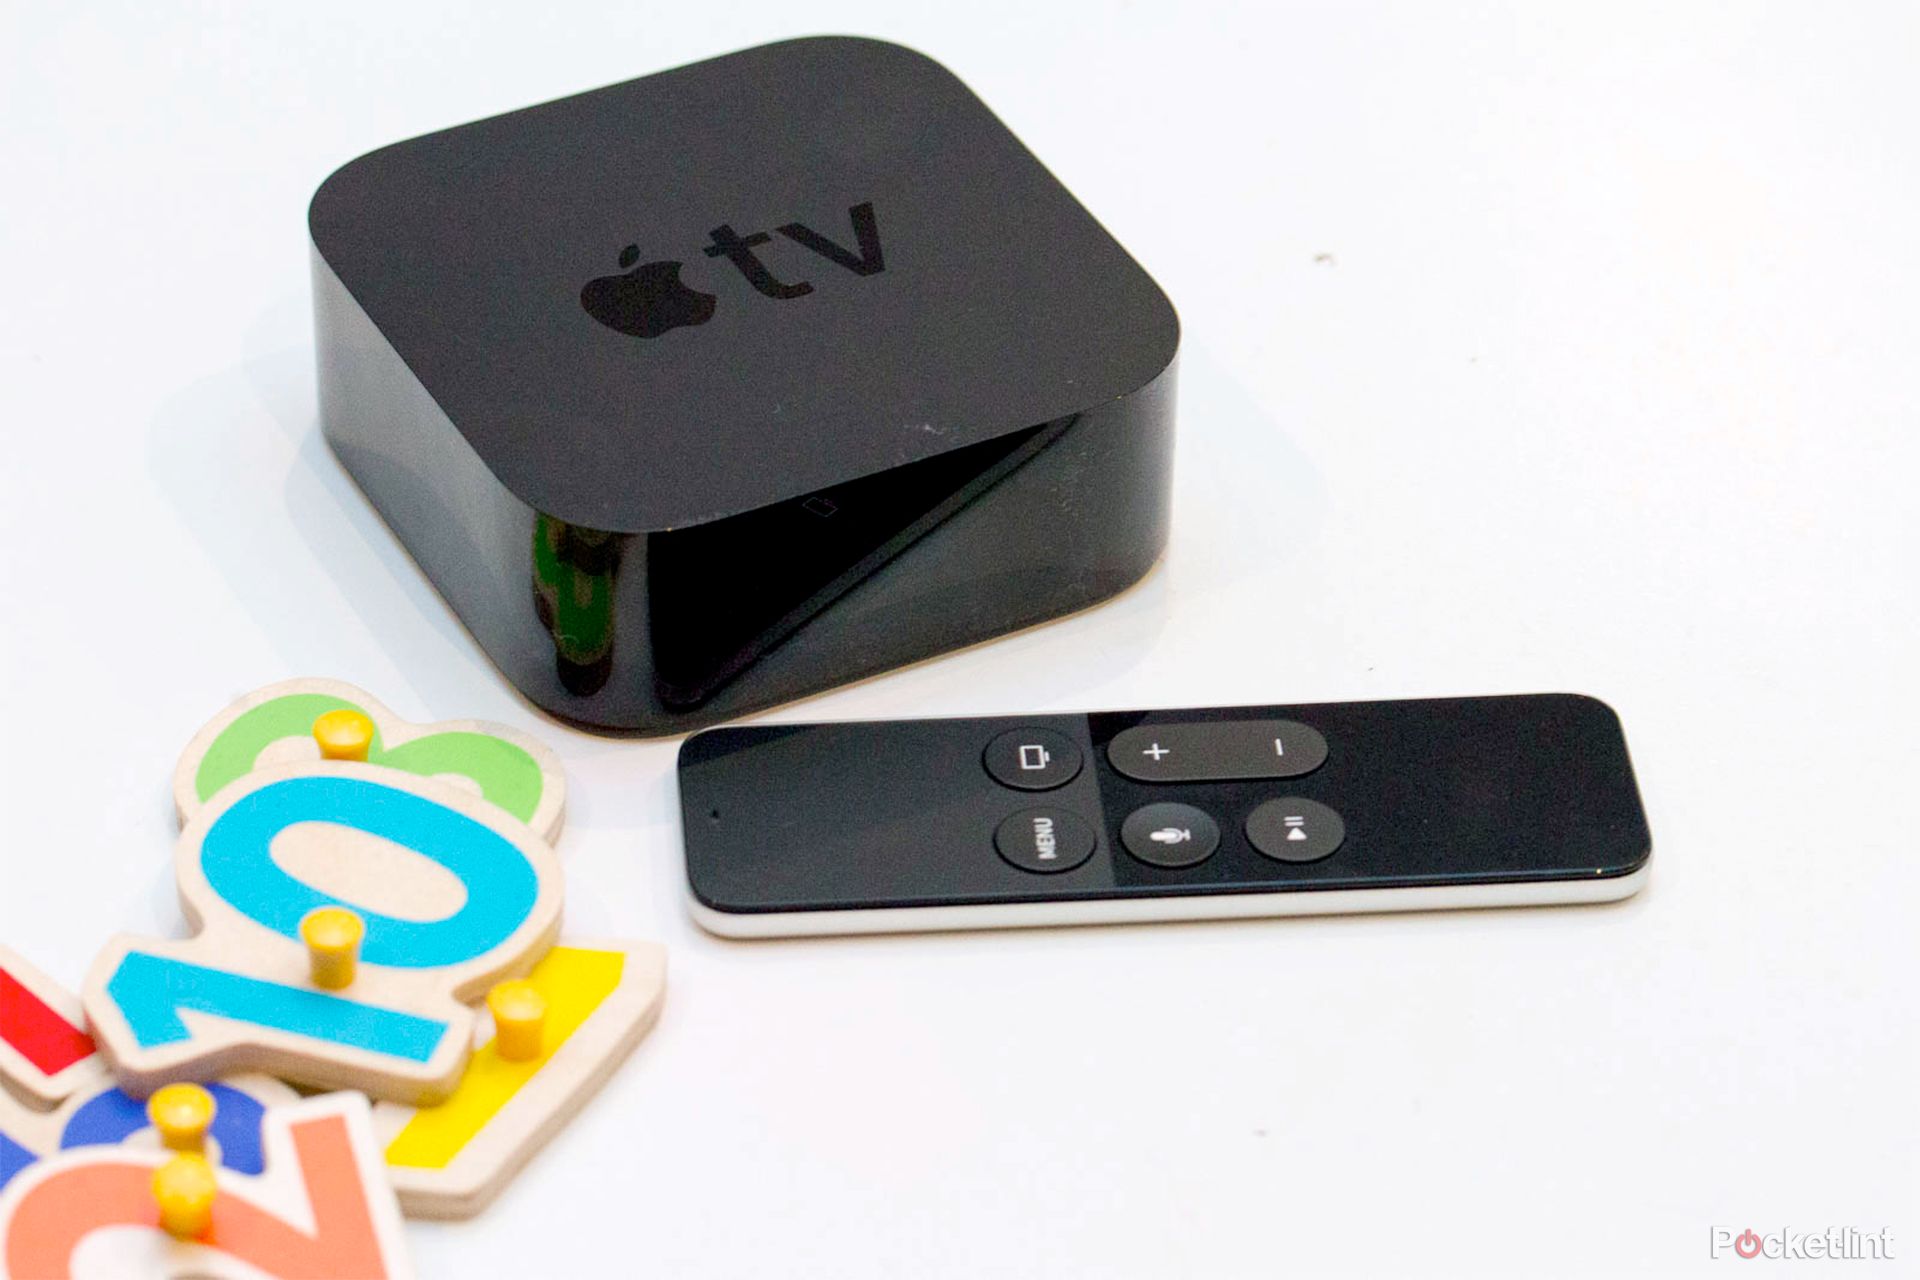 It looks like Apple TV boxes will get a kids mode image 1